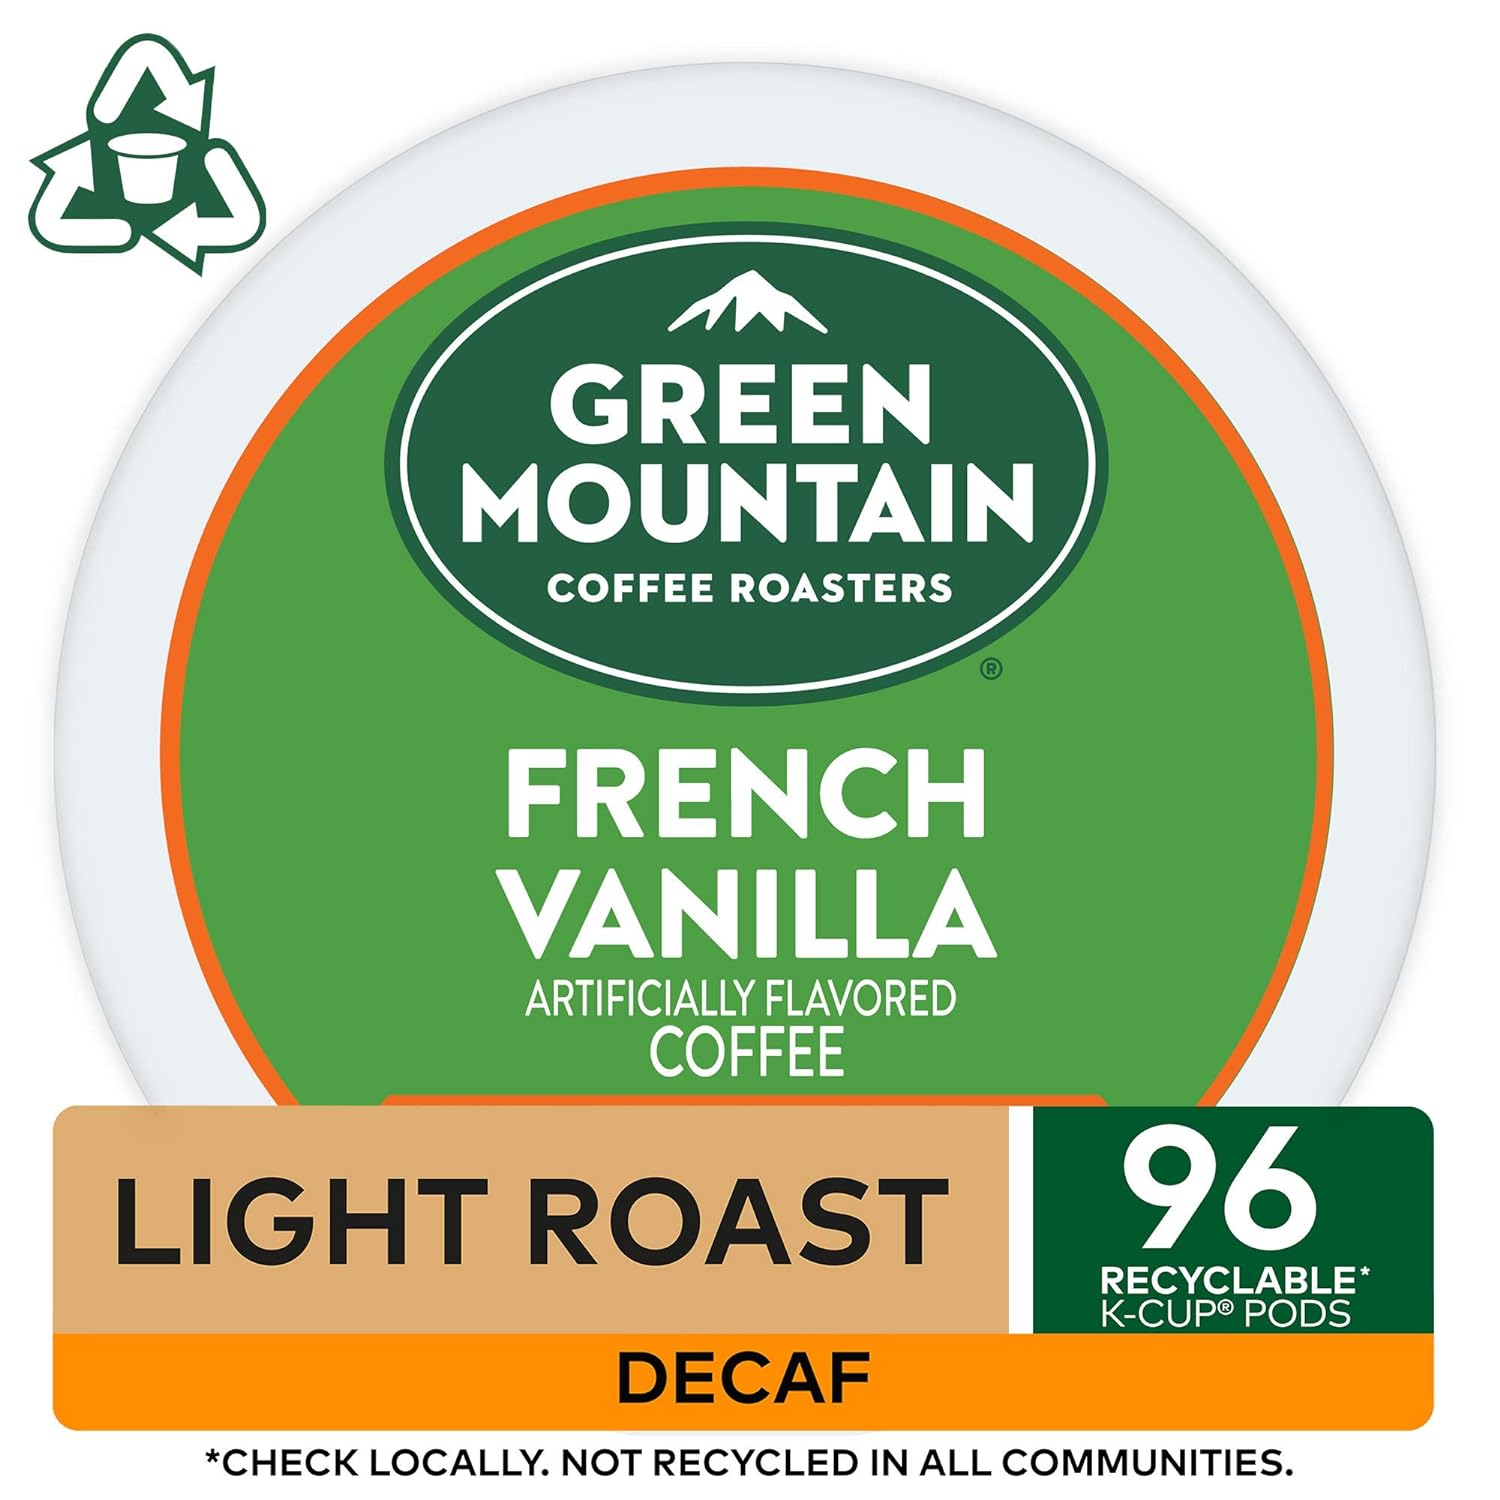 Green Mountain Coffee Roasters French Vanilla Coffee, Keurig Single-Serve K-Cup pods, Light Roast, 96 Count (4 Packs of 24)